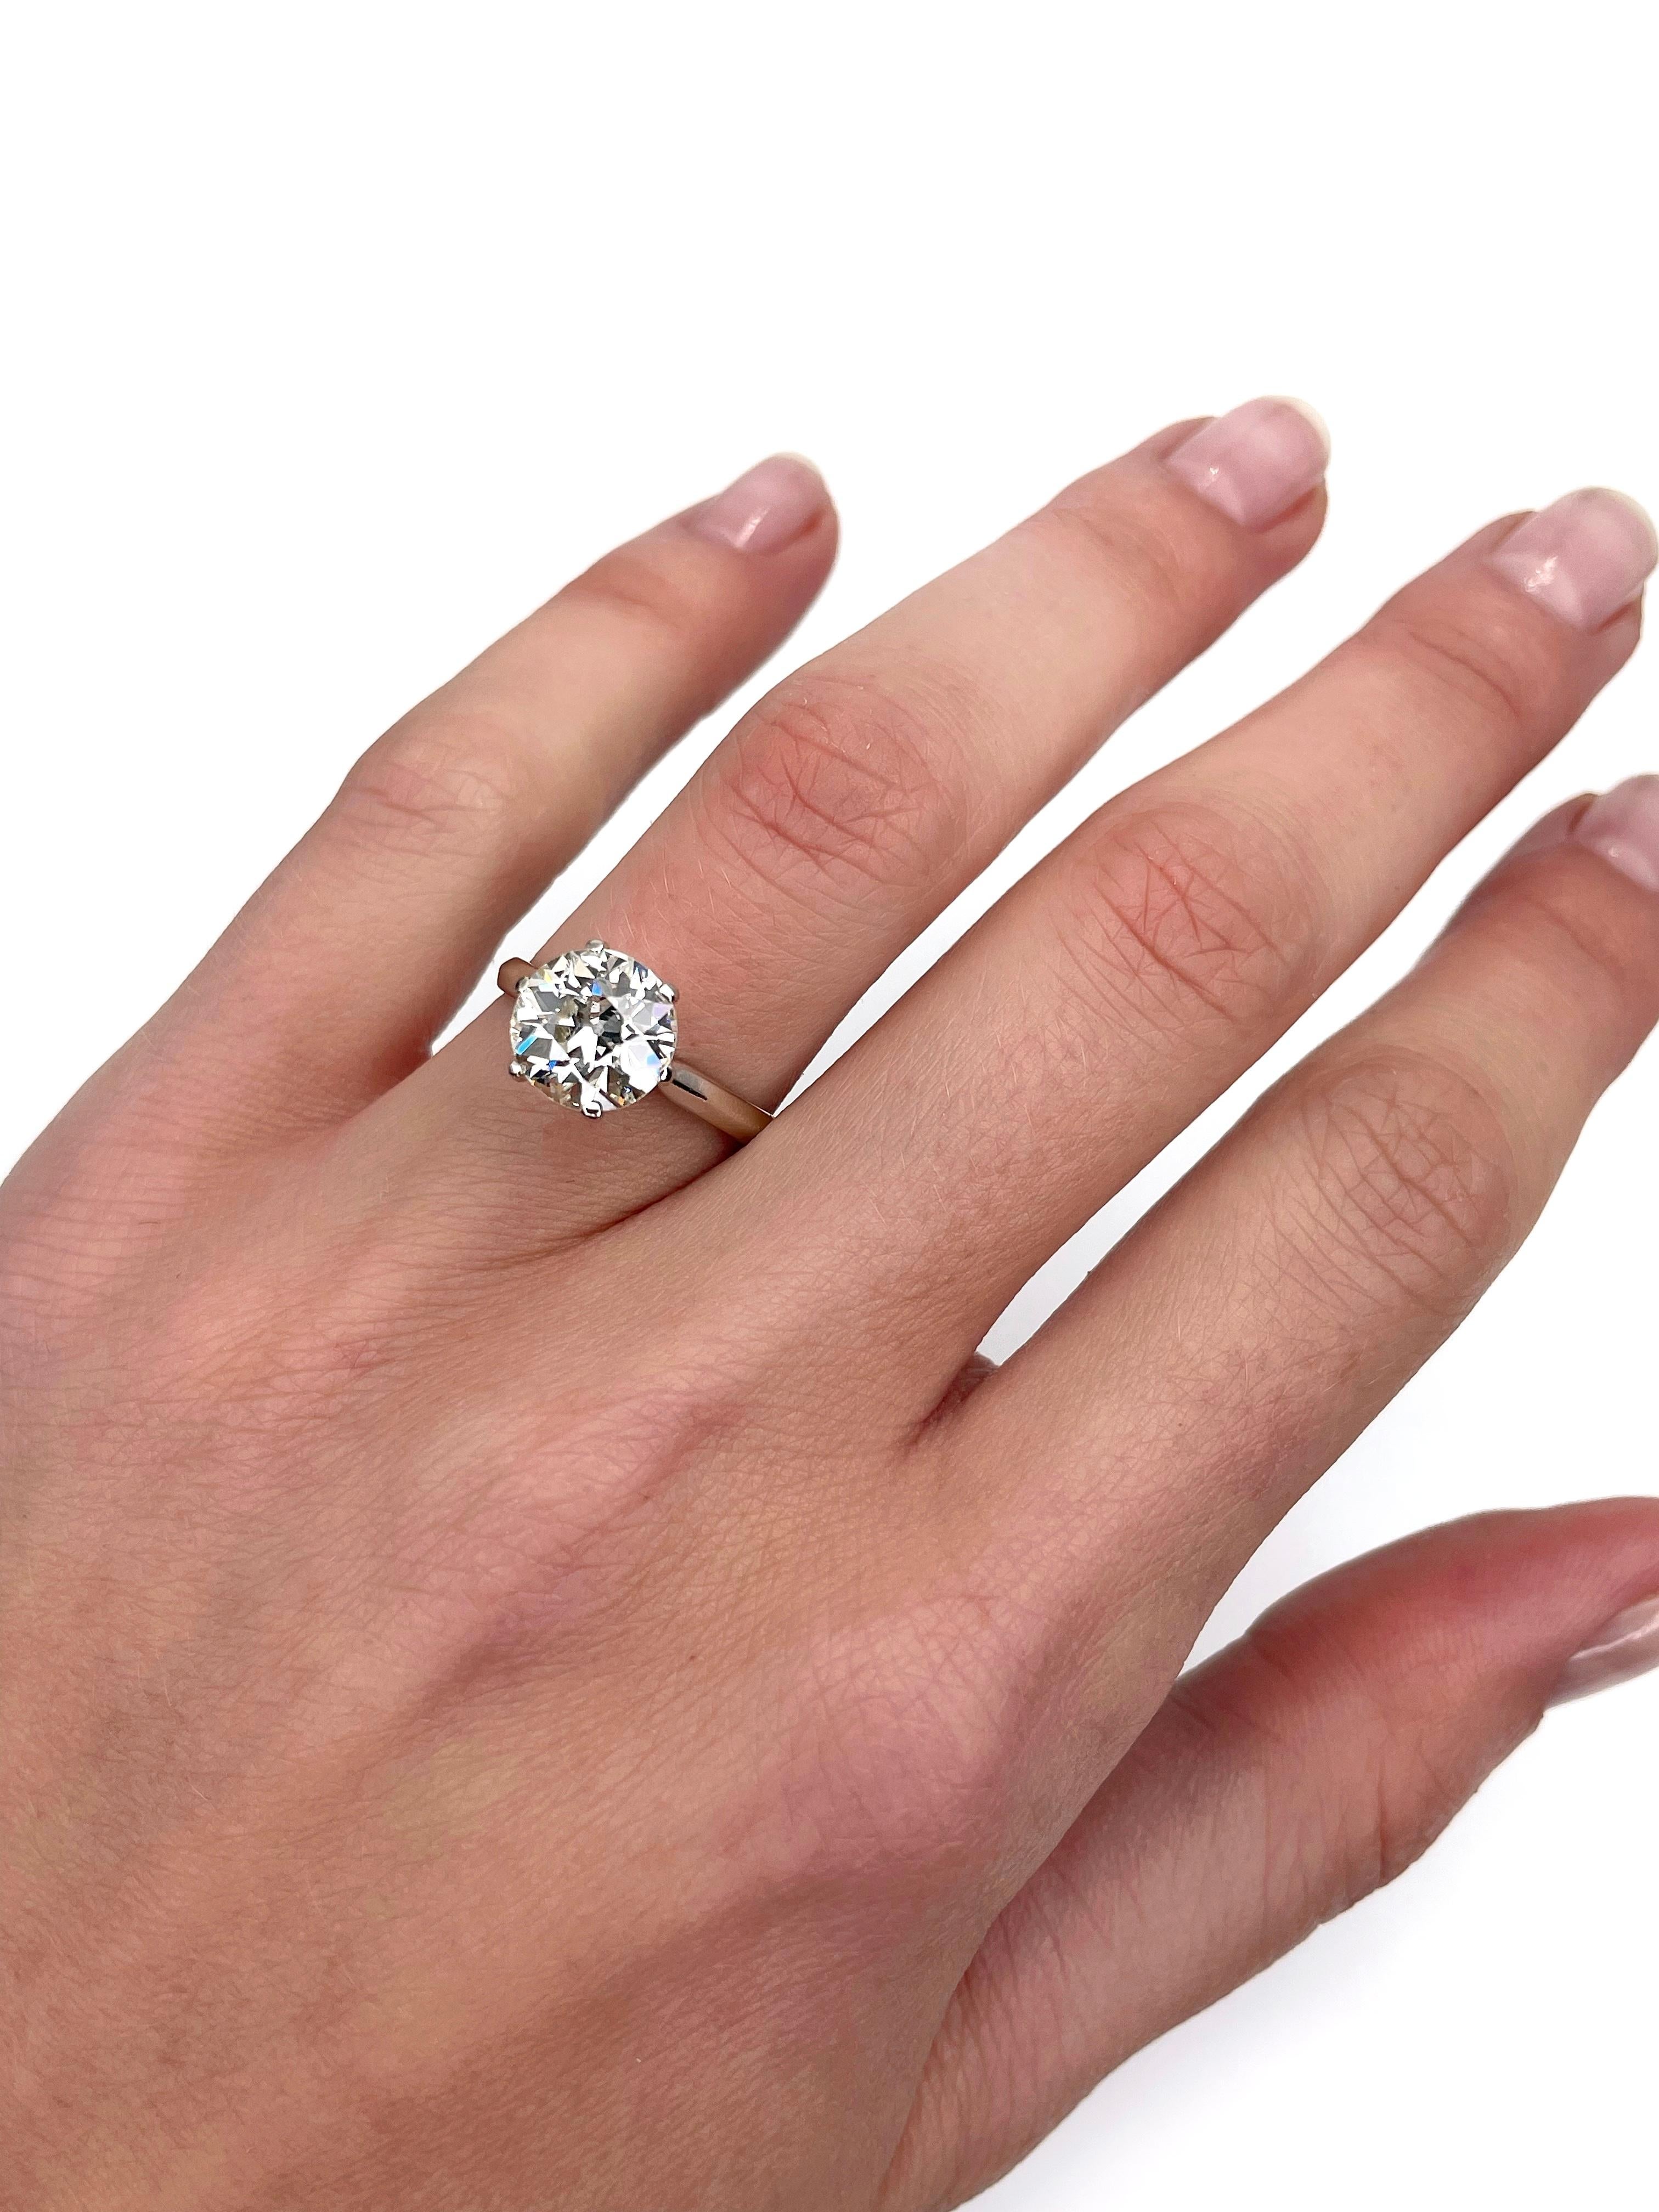 This is a magnificent engagement ring crafted in 18K white gold. The piece is certified by Assay Office with a gemstone testing report (can be found in photo gallery).

The ring features a natural diamond. Main characteristics:
- shape and cut: